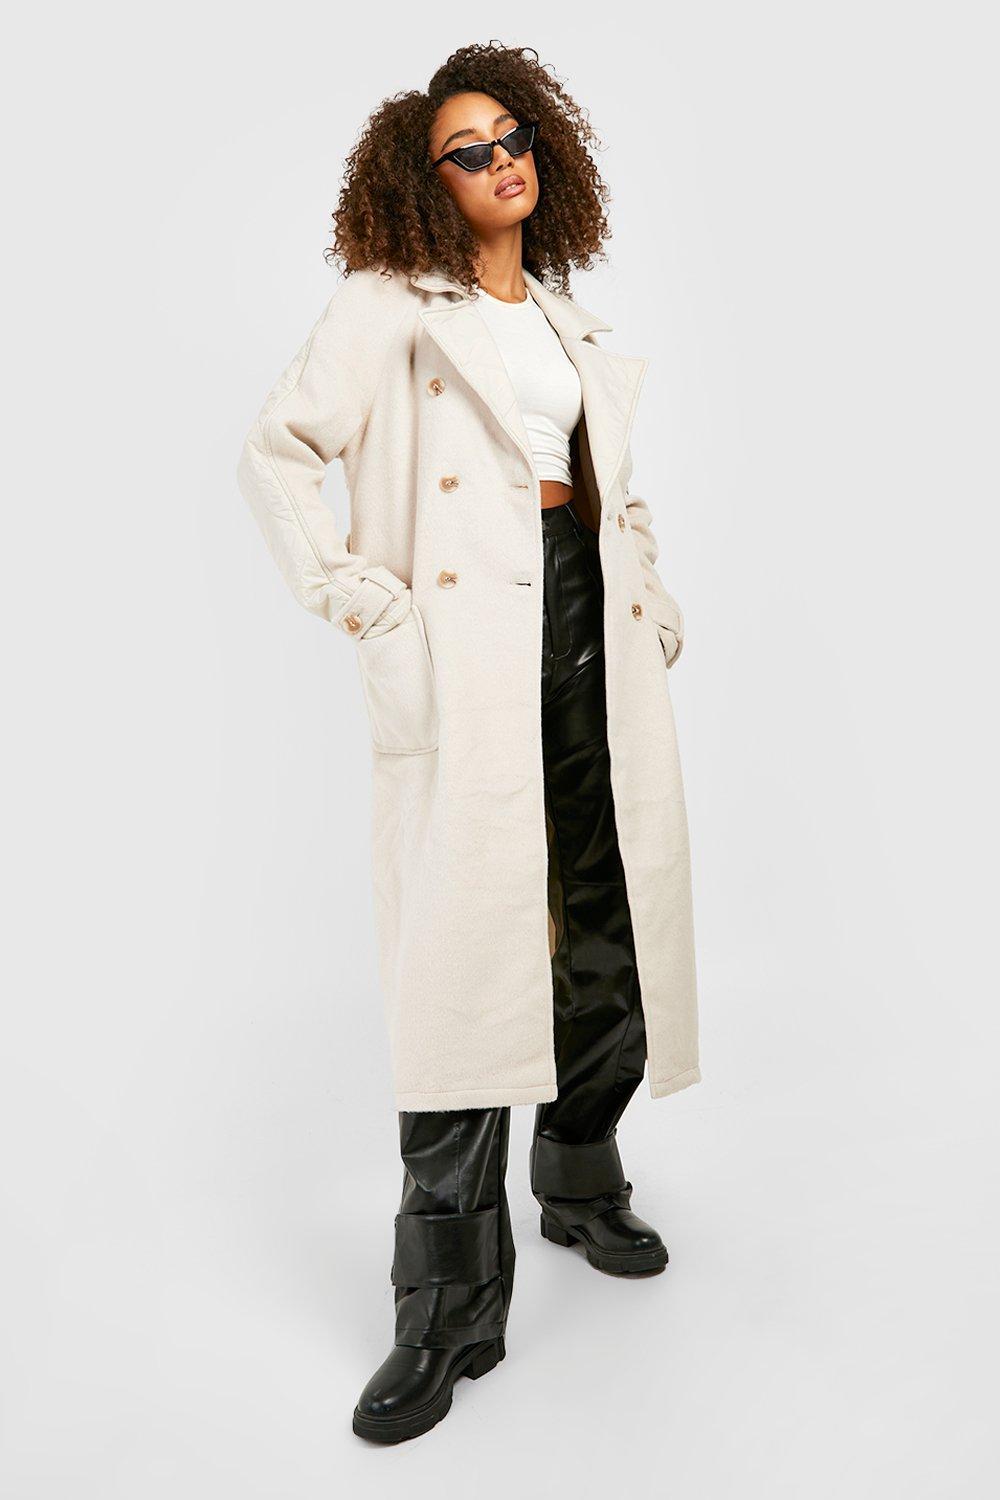 envy barbecue Justice Boohoo Tall Quilt Detail Wool Look Trench Coat in Natural | Lyst